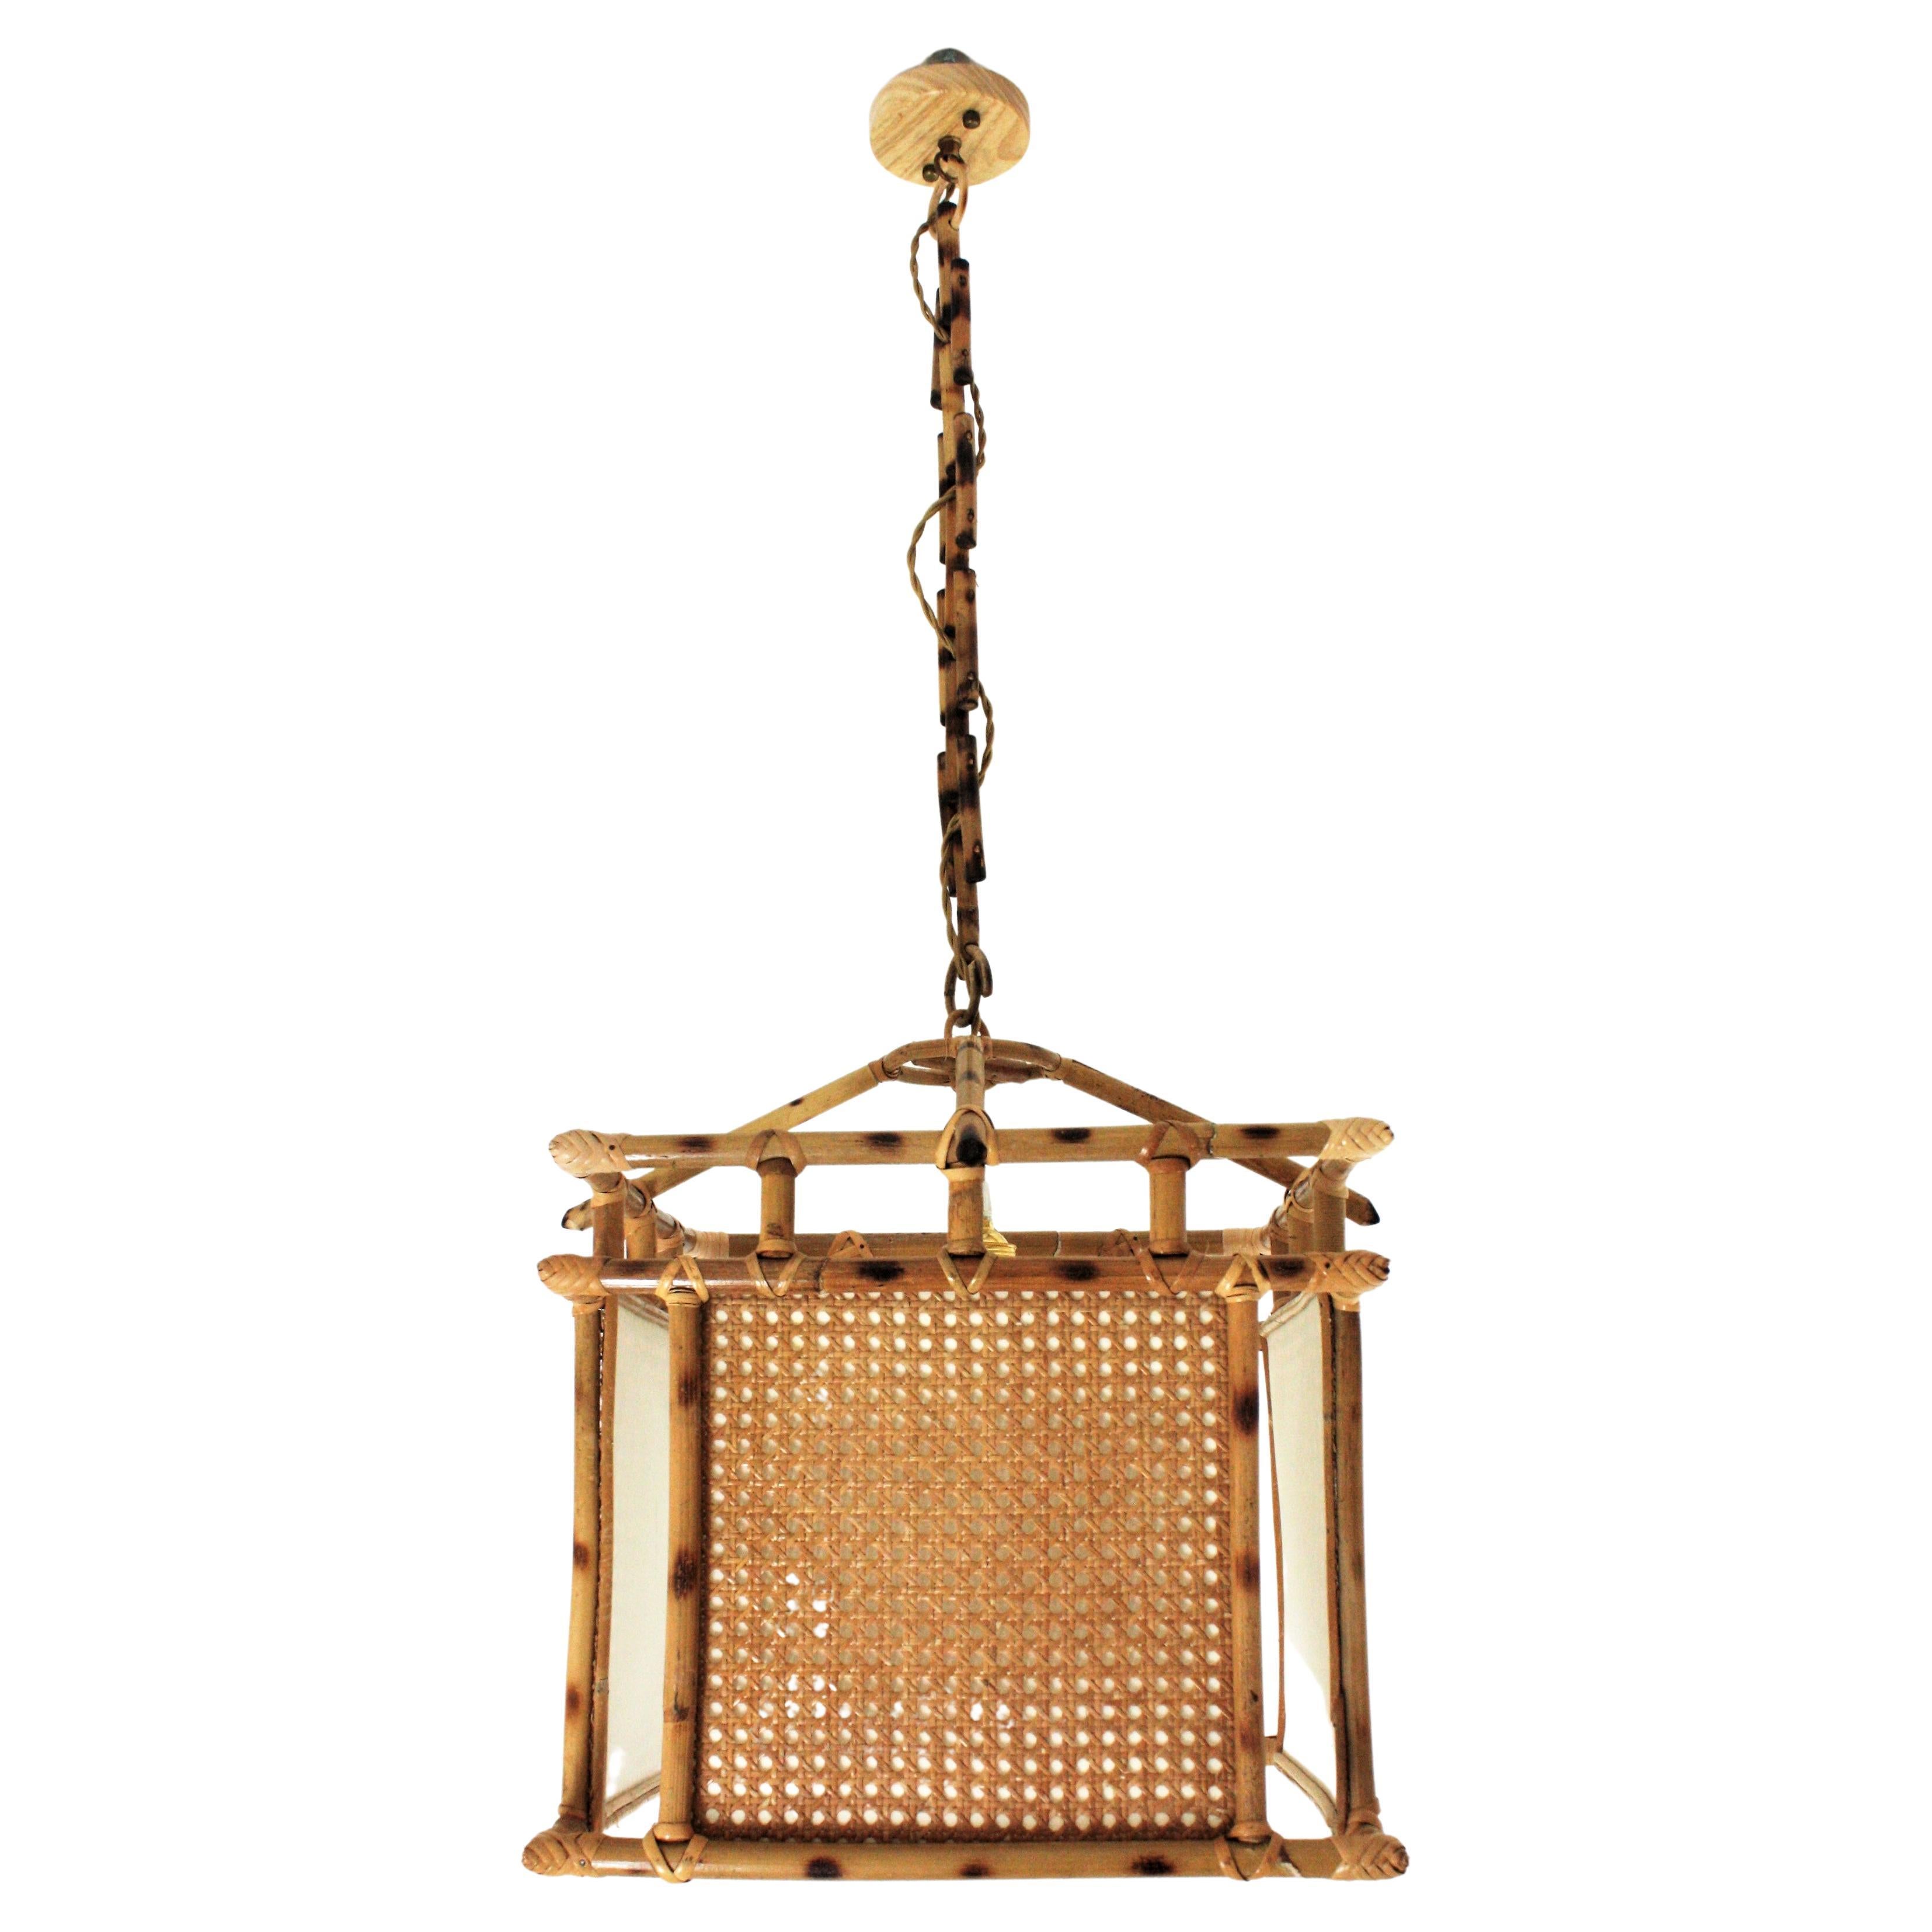 Oriental Inspired rattan squared lantern with wicker wire cannage panels. Spain, 1950s-1960s.
This handcrafted ceiling lamp features a squared lantern made of rattan canes with cannage panels and an inner paper lampshade. The chain is made of wicker